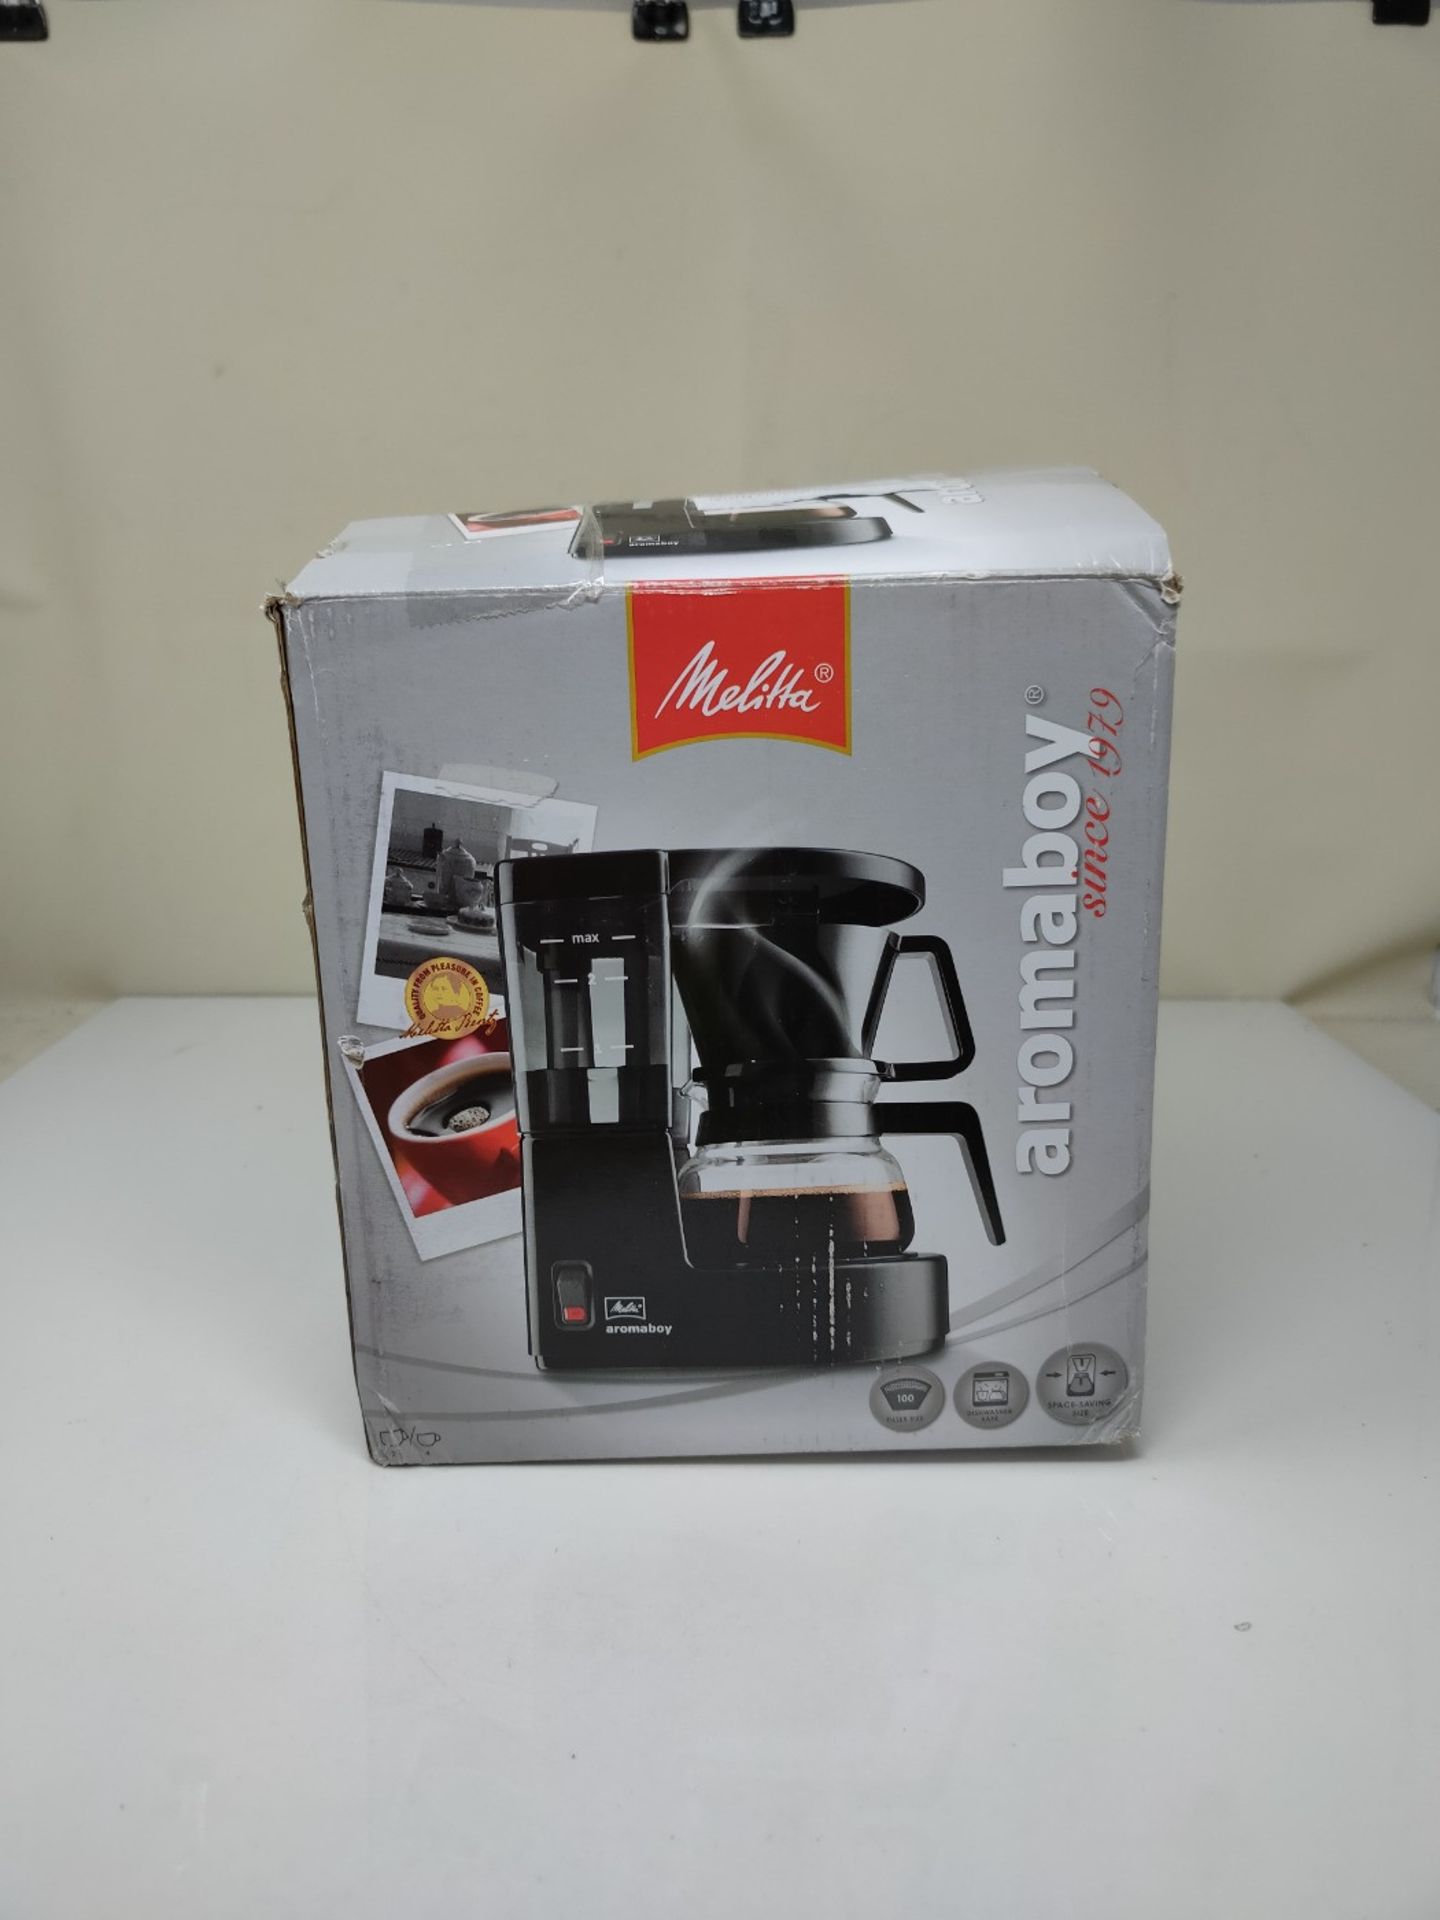 Melitta, filter coffee machine, Aromaboy, 2 cup glass jug, filter insert, white, 10150 - Image 2 of 3